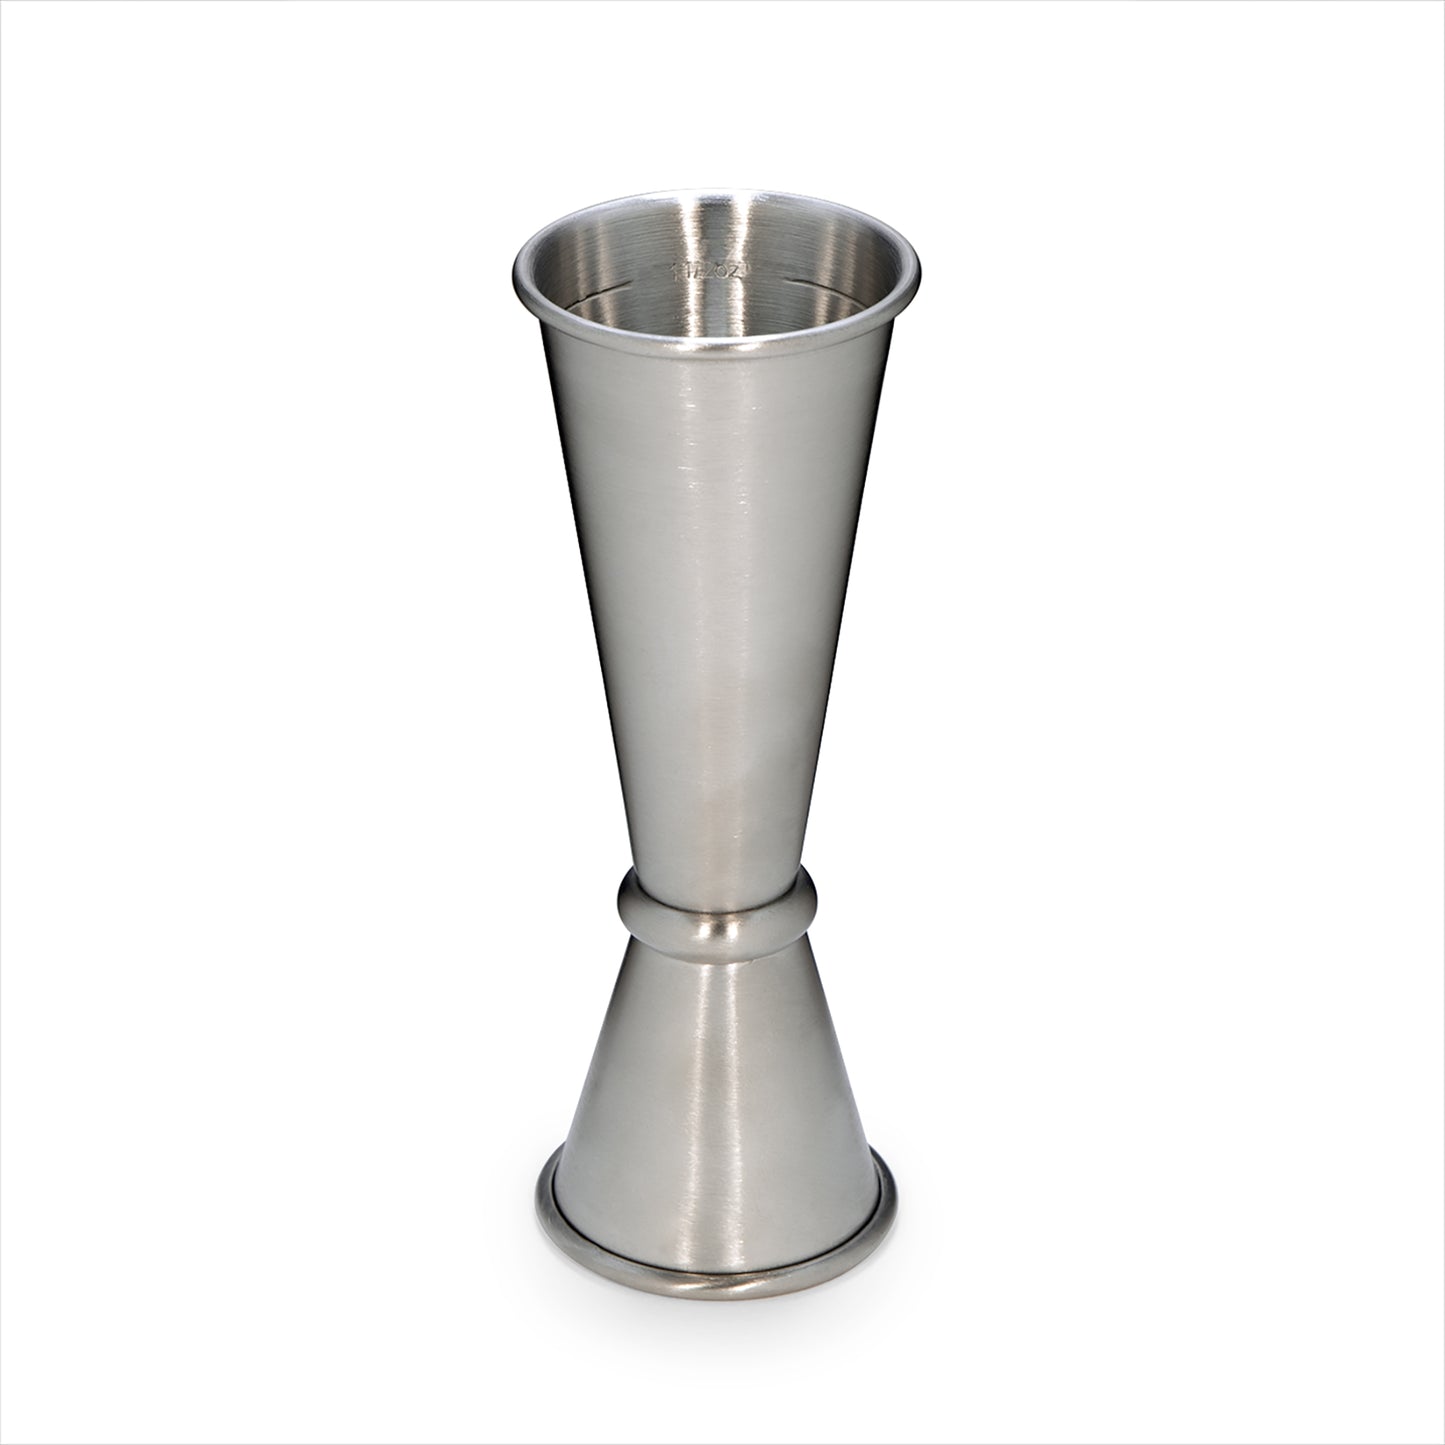 1oz/2oz Stainless Steel Cocktail Jigger Shot Glass Measuring Cup, Silver